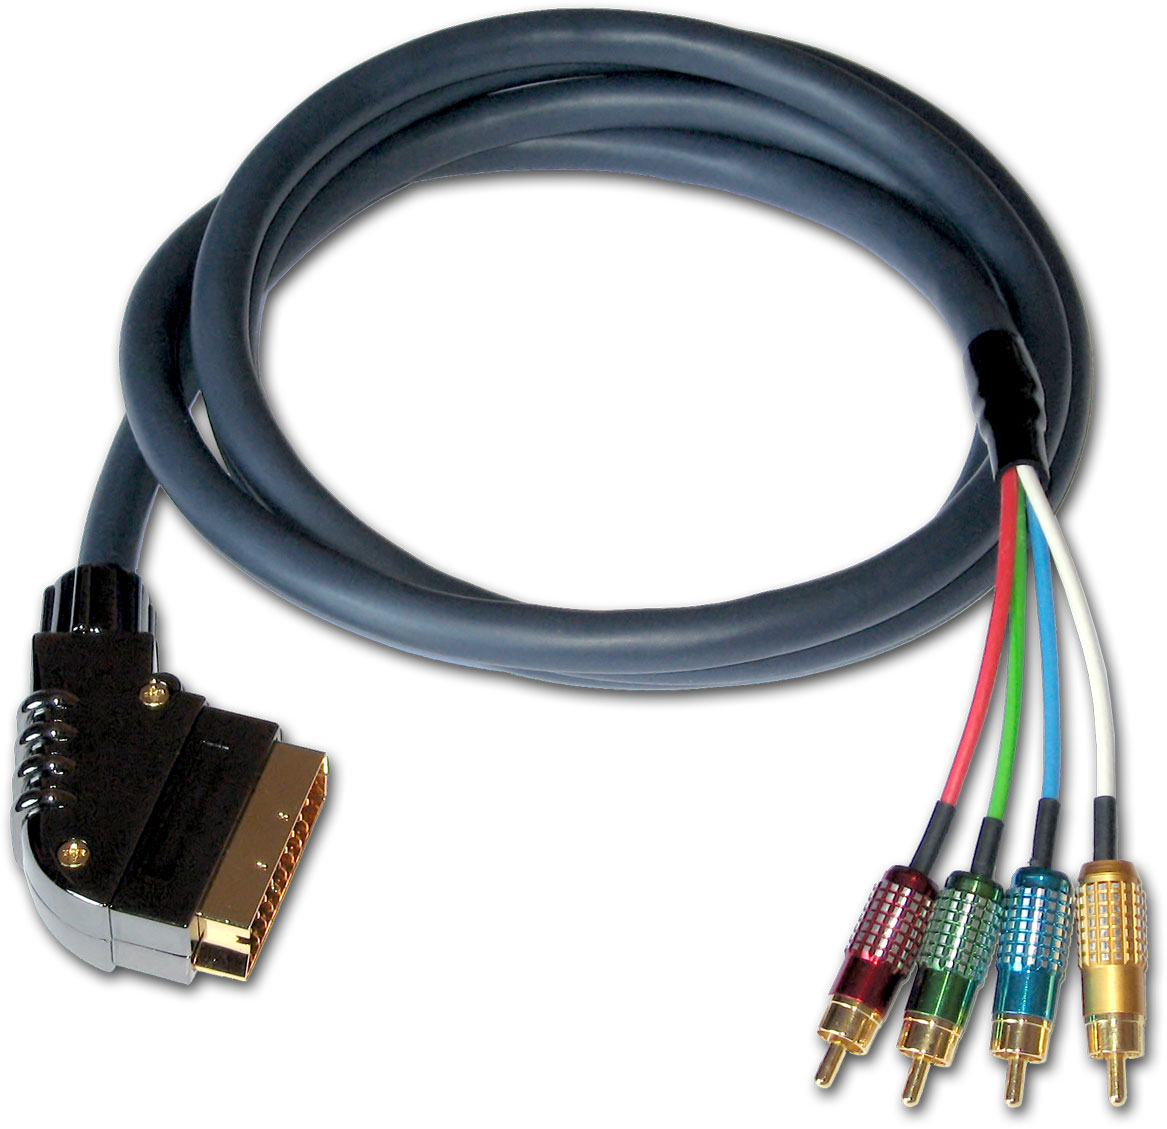 Professional Scart cable / RGBs 4xRCA for scalers and projectors XXL Image